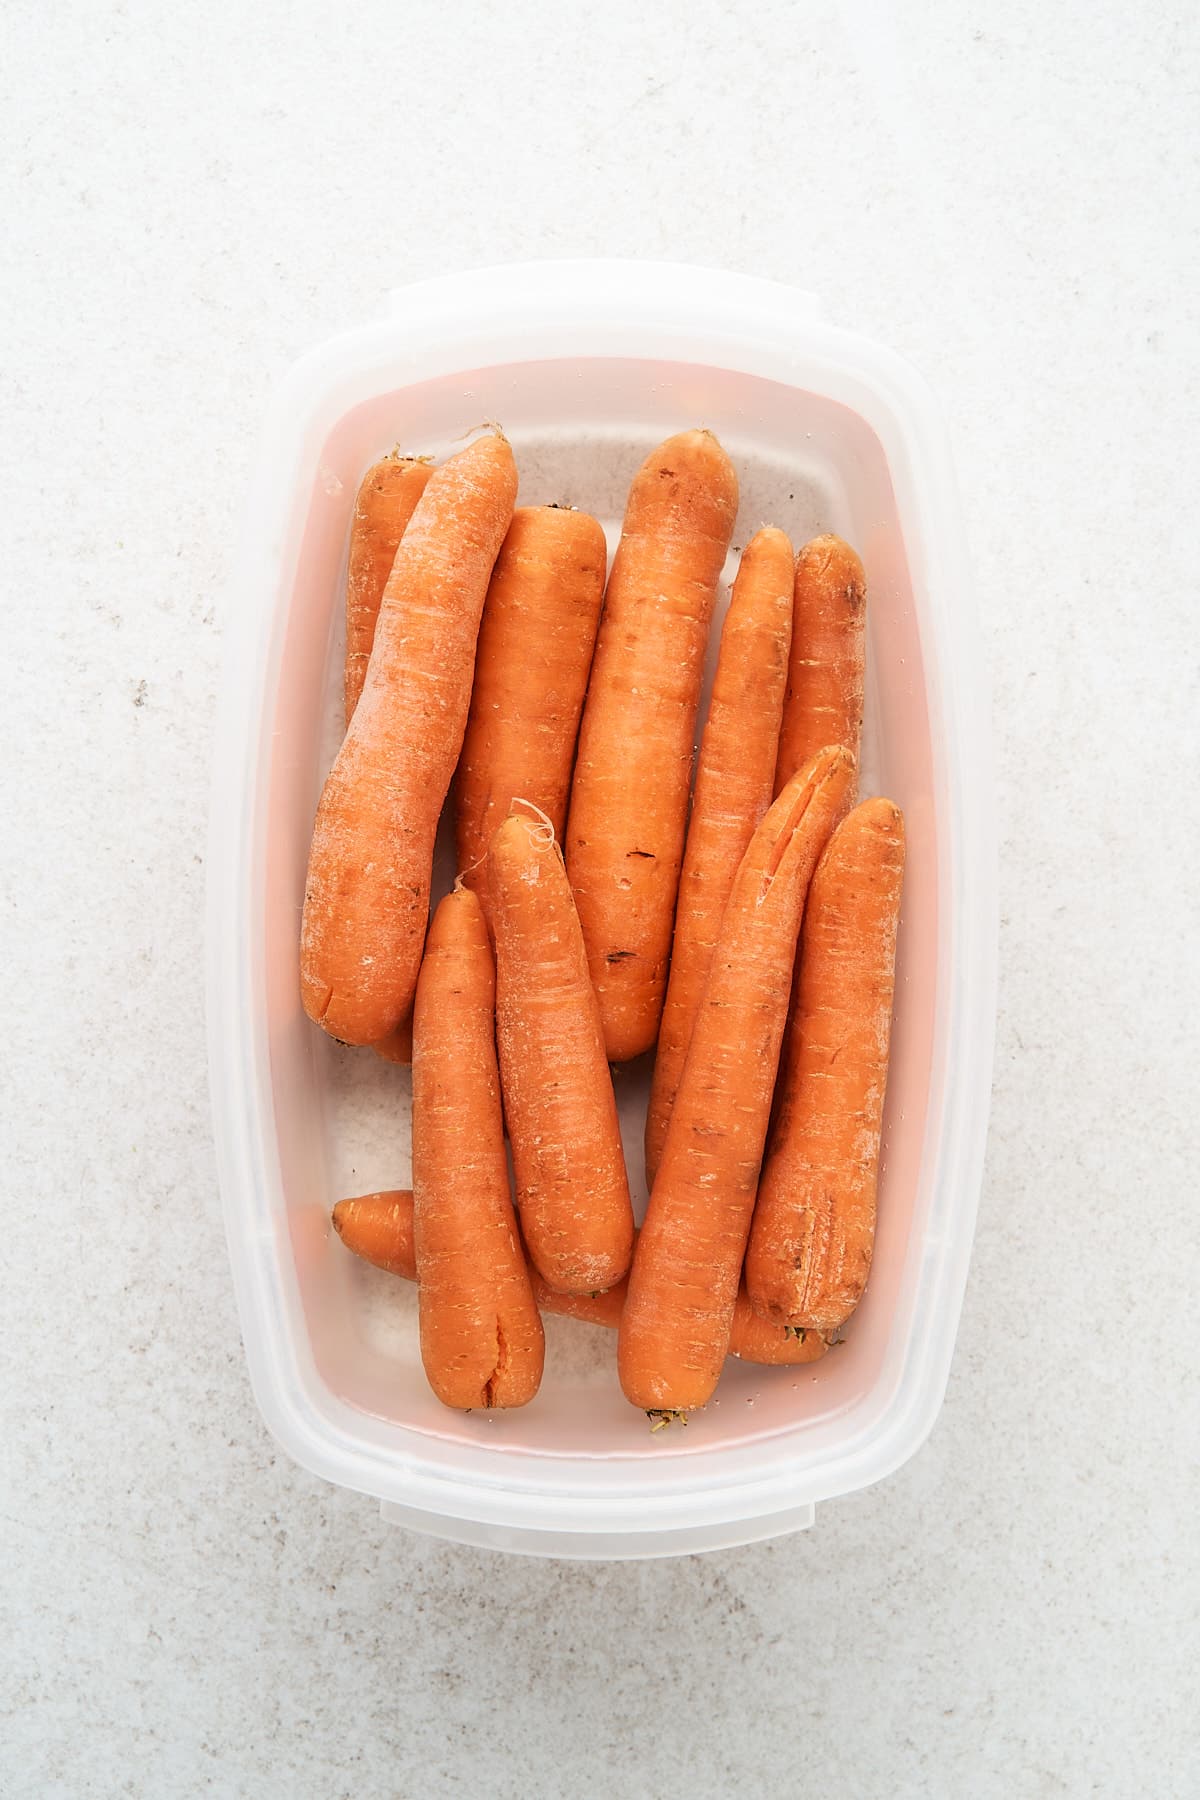 Whole carrots in a container of water.